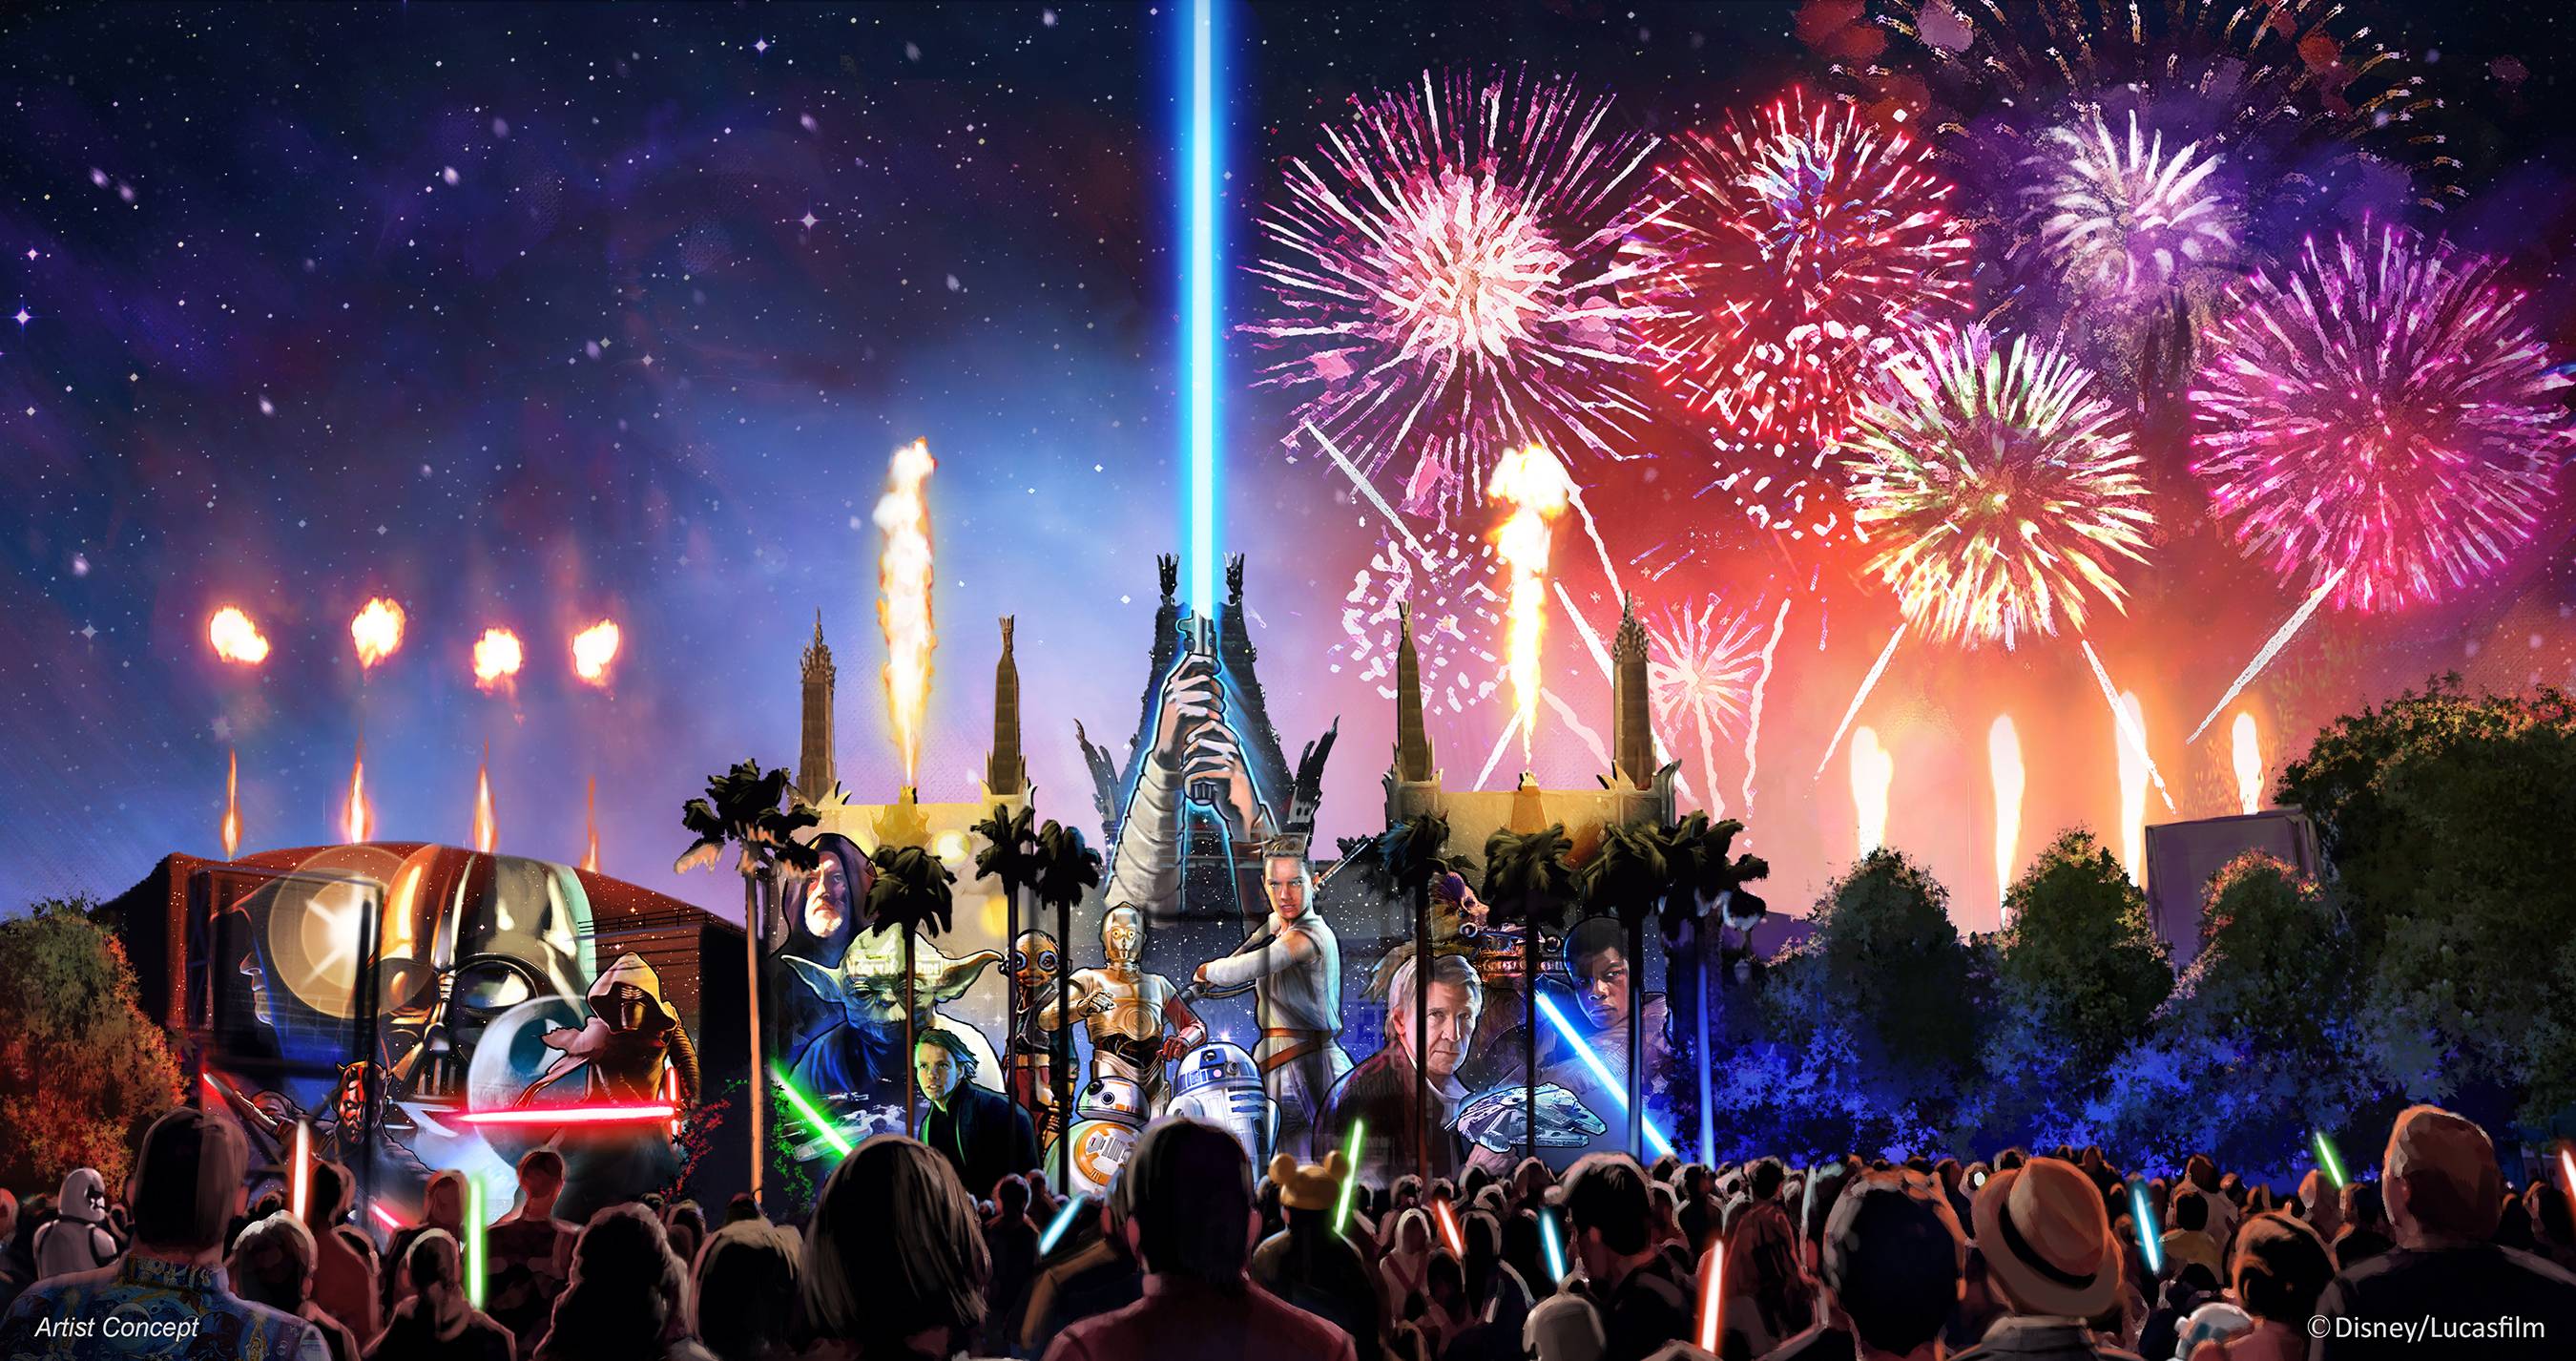 Next generation nighttime show 'Star Wars A Galactic Spectacular' opens this summer at Disney's Hollywood Studios